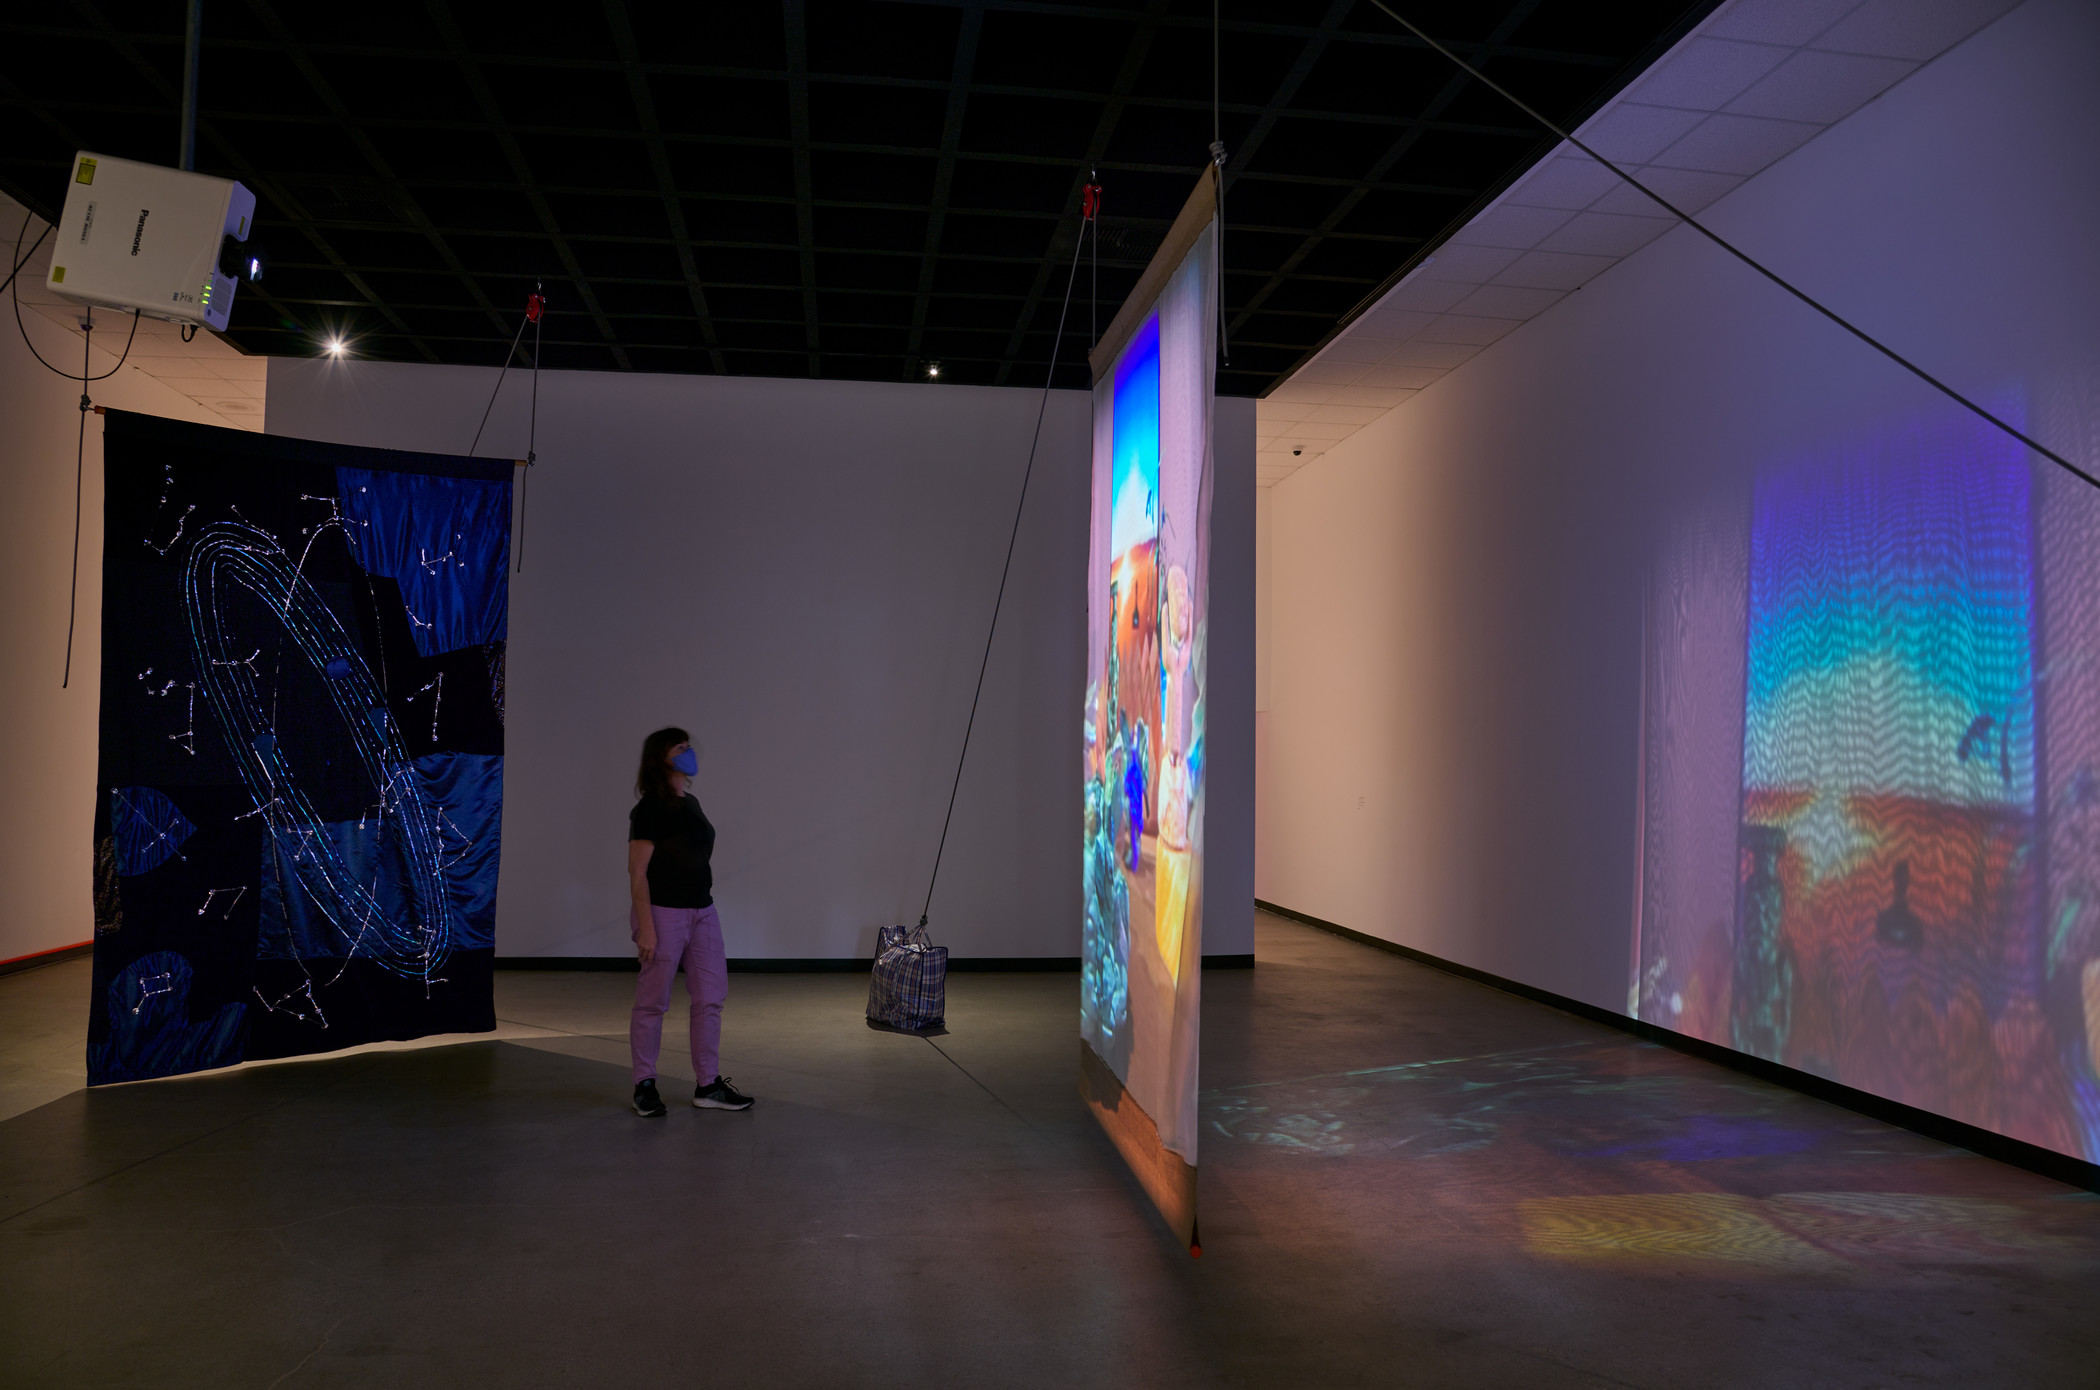 Photograph of a person viewing a video projection, with a large banner behind the person